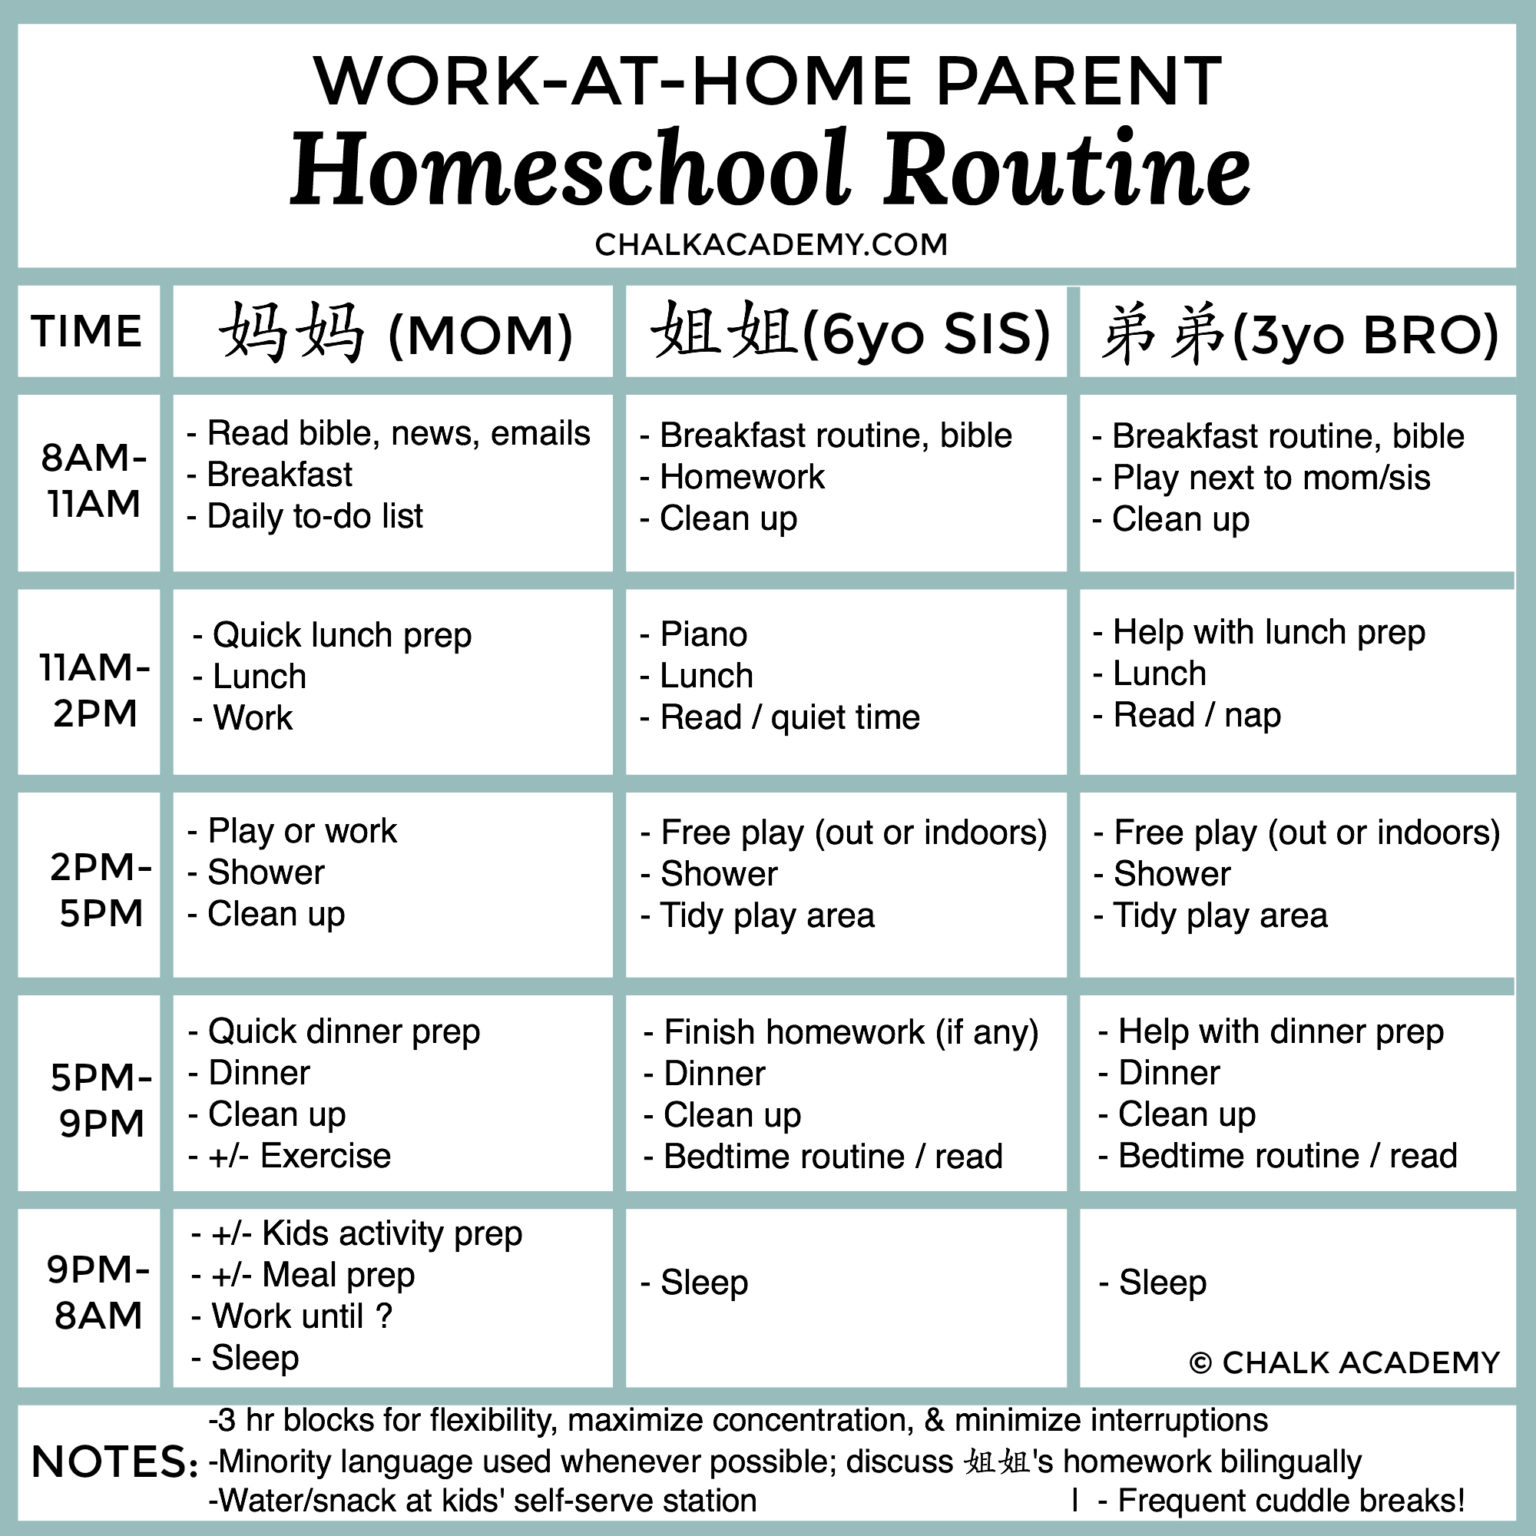 work-at-home-bilingual-homeschool-schedule-with-kids